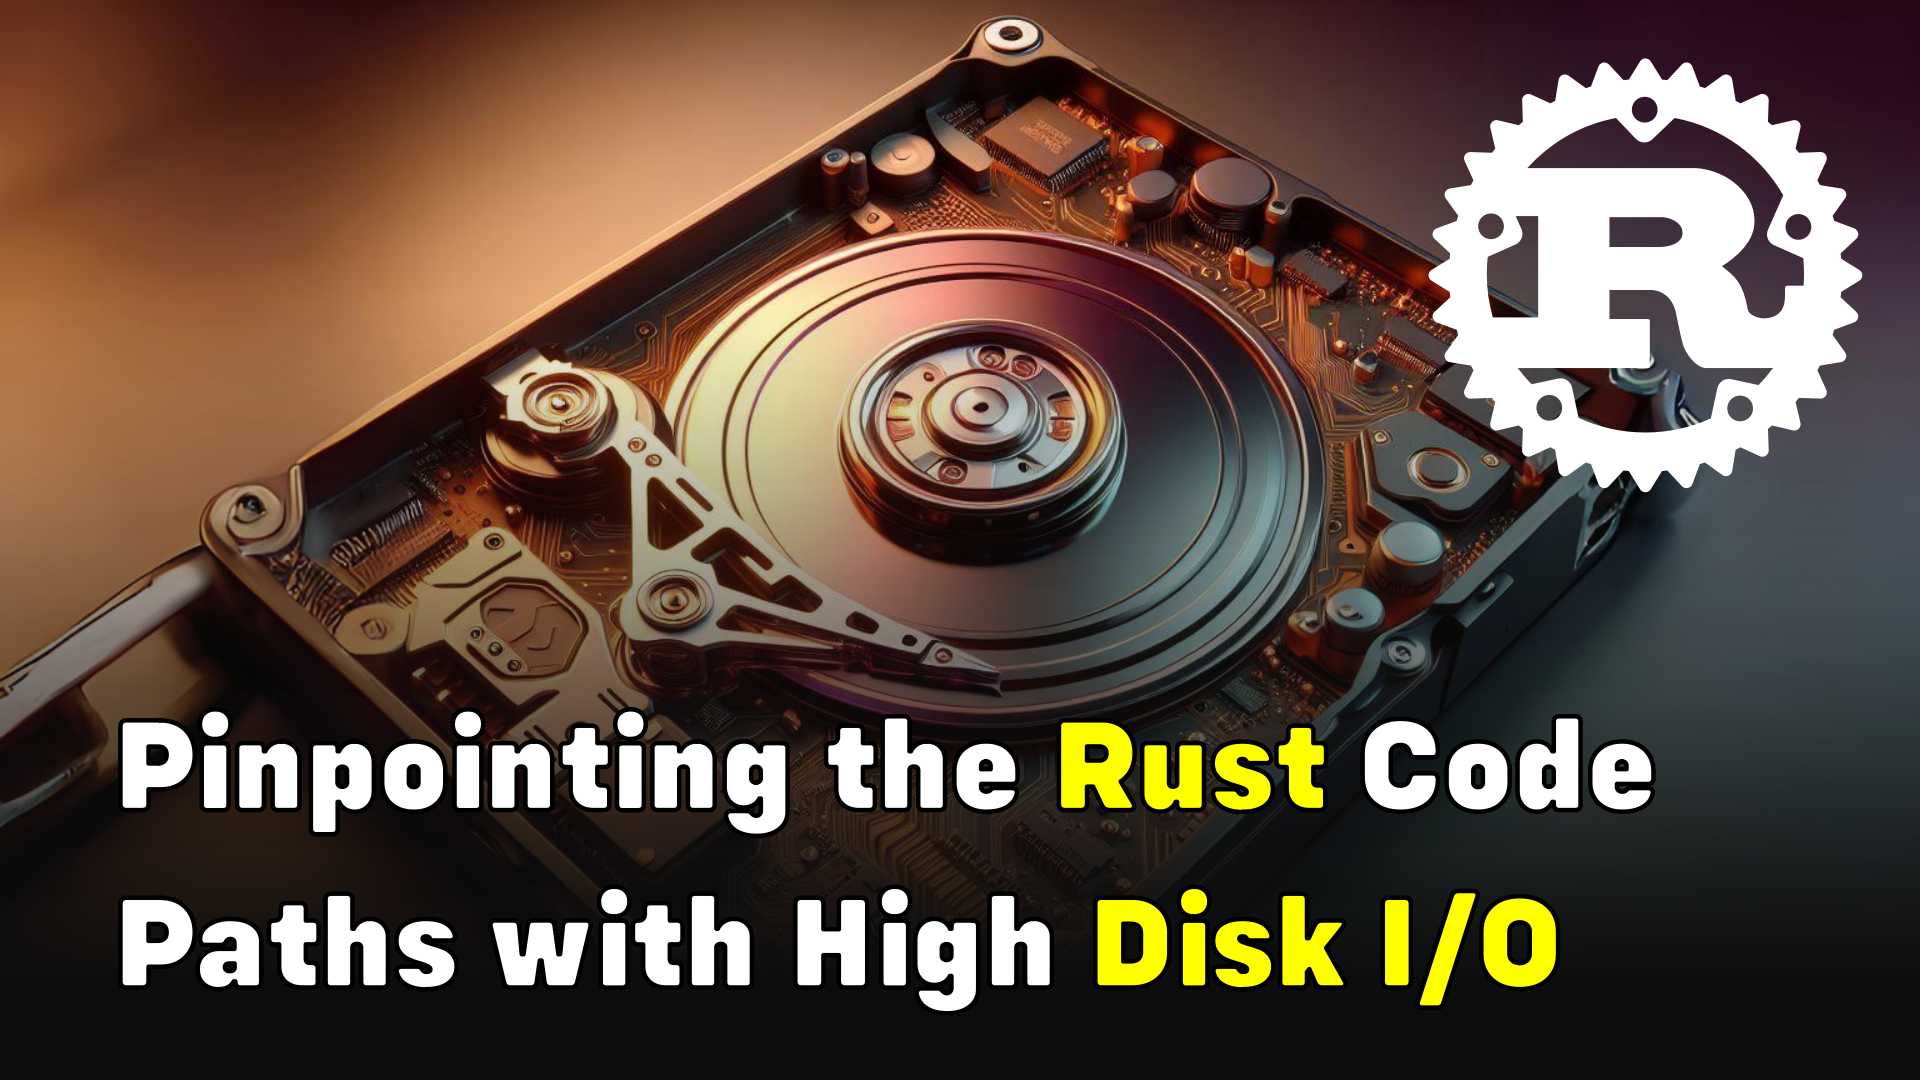 Pinpointing the Hottest Rust Code Paths with High Disk I/O (using OpenResty XRay)